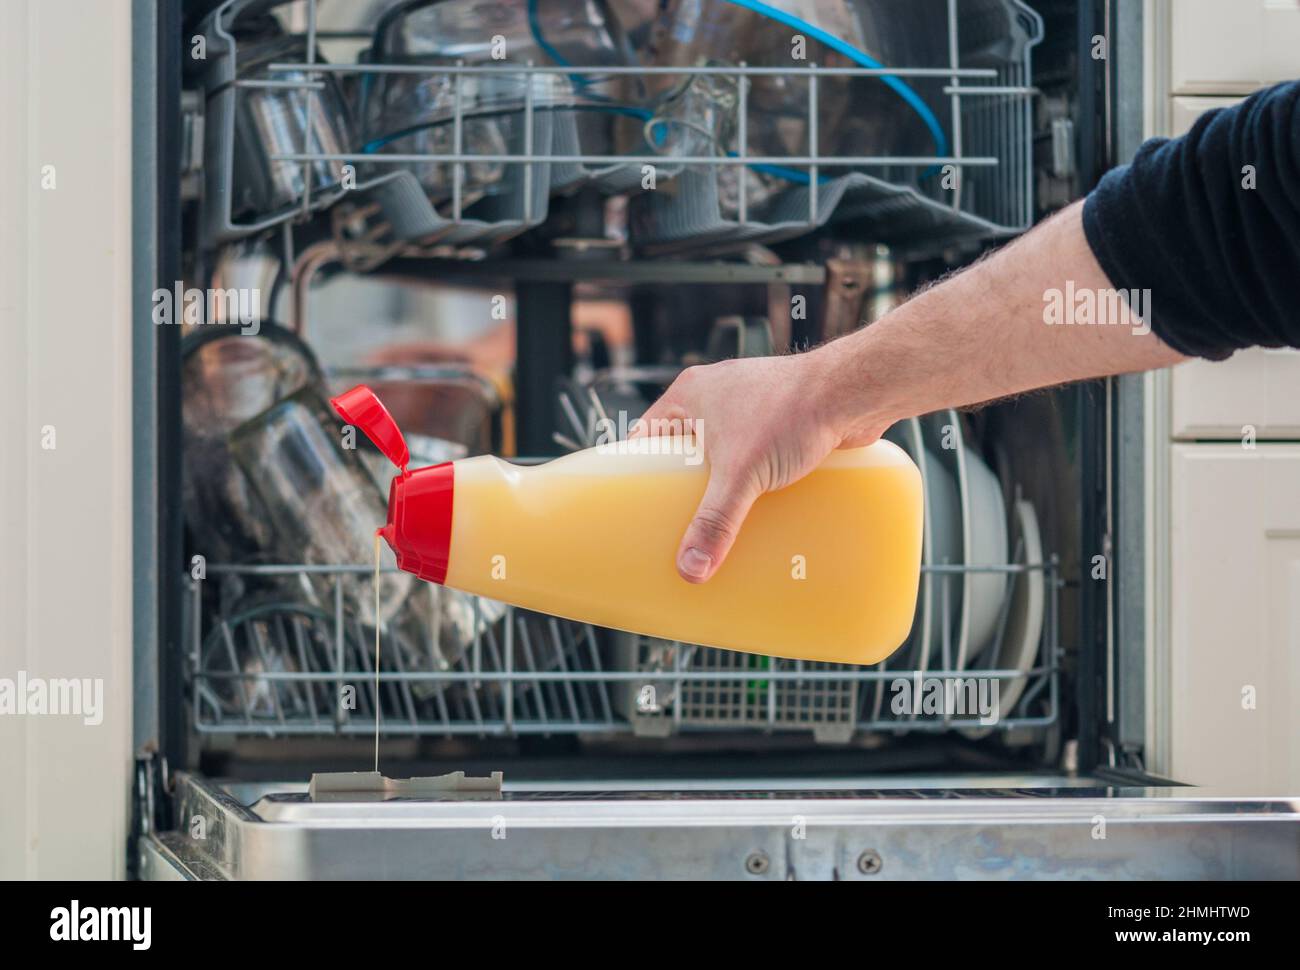 arm of a man holding a bottle of detergent and pouring it into the dishwasher Stock Photo